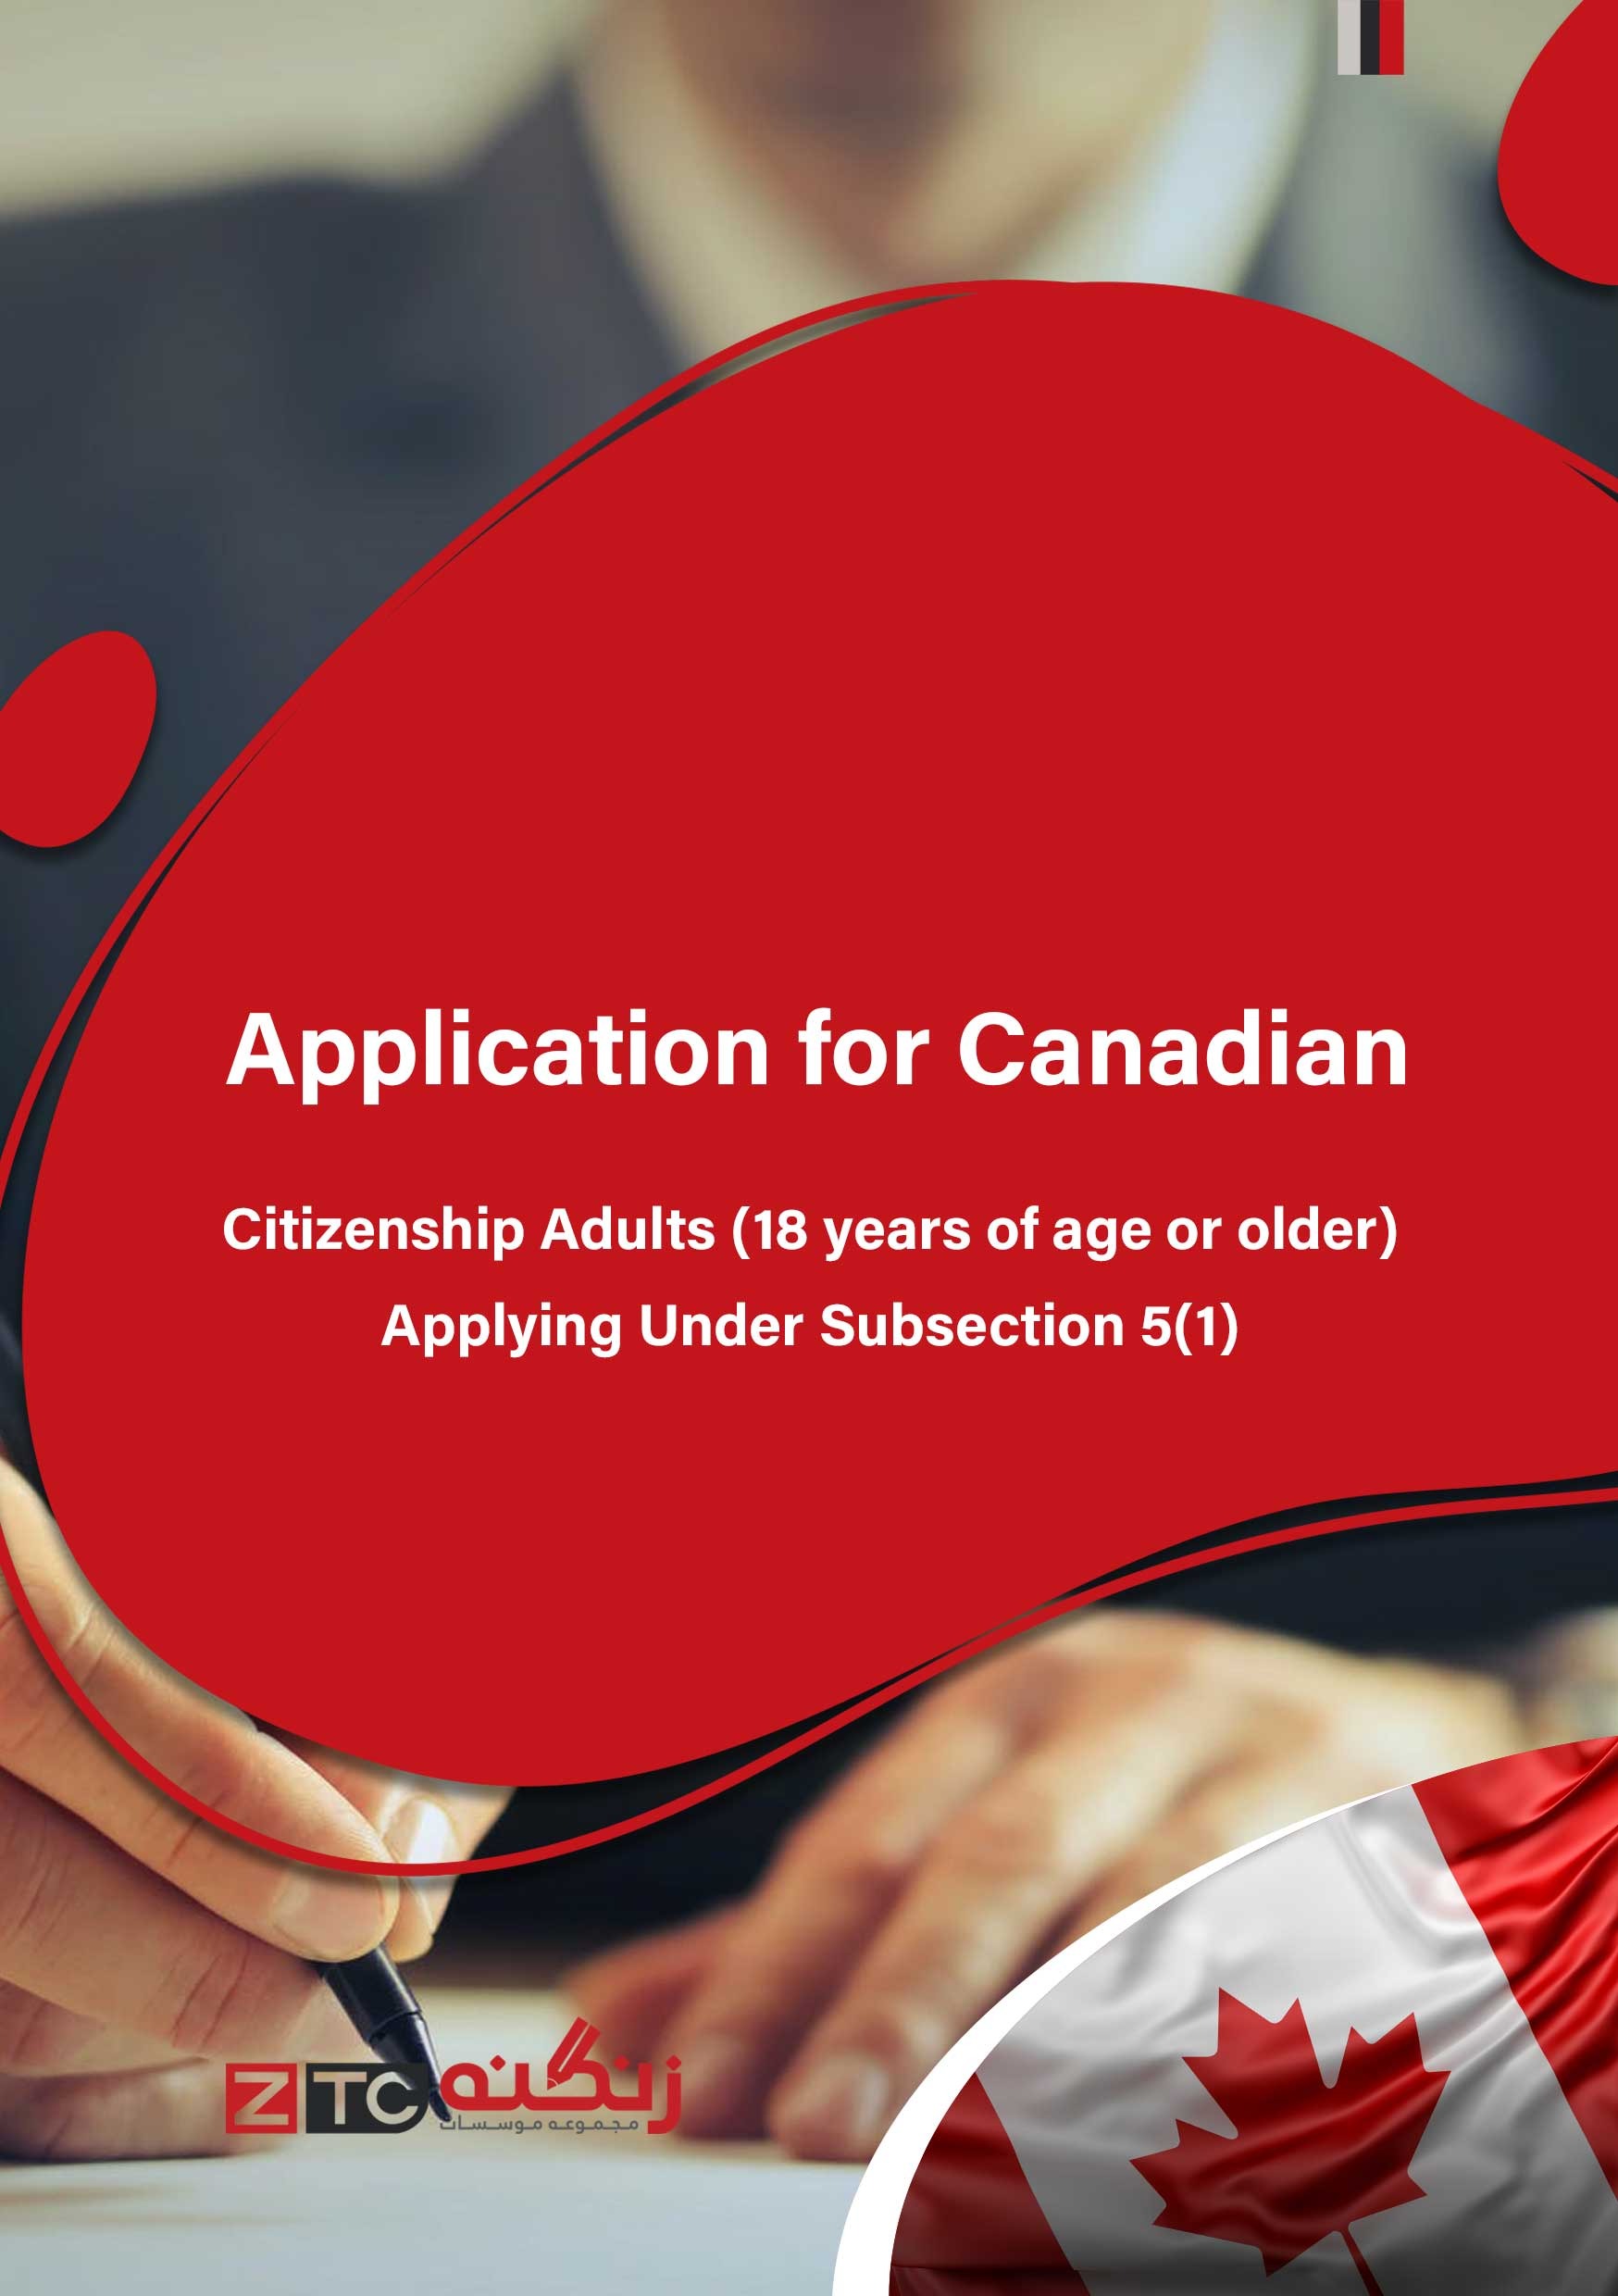 Application for Canadian Citizenship Adults (18 years of age or older) Applying Under Subsection 5(1)